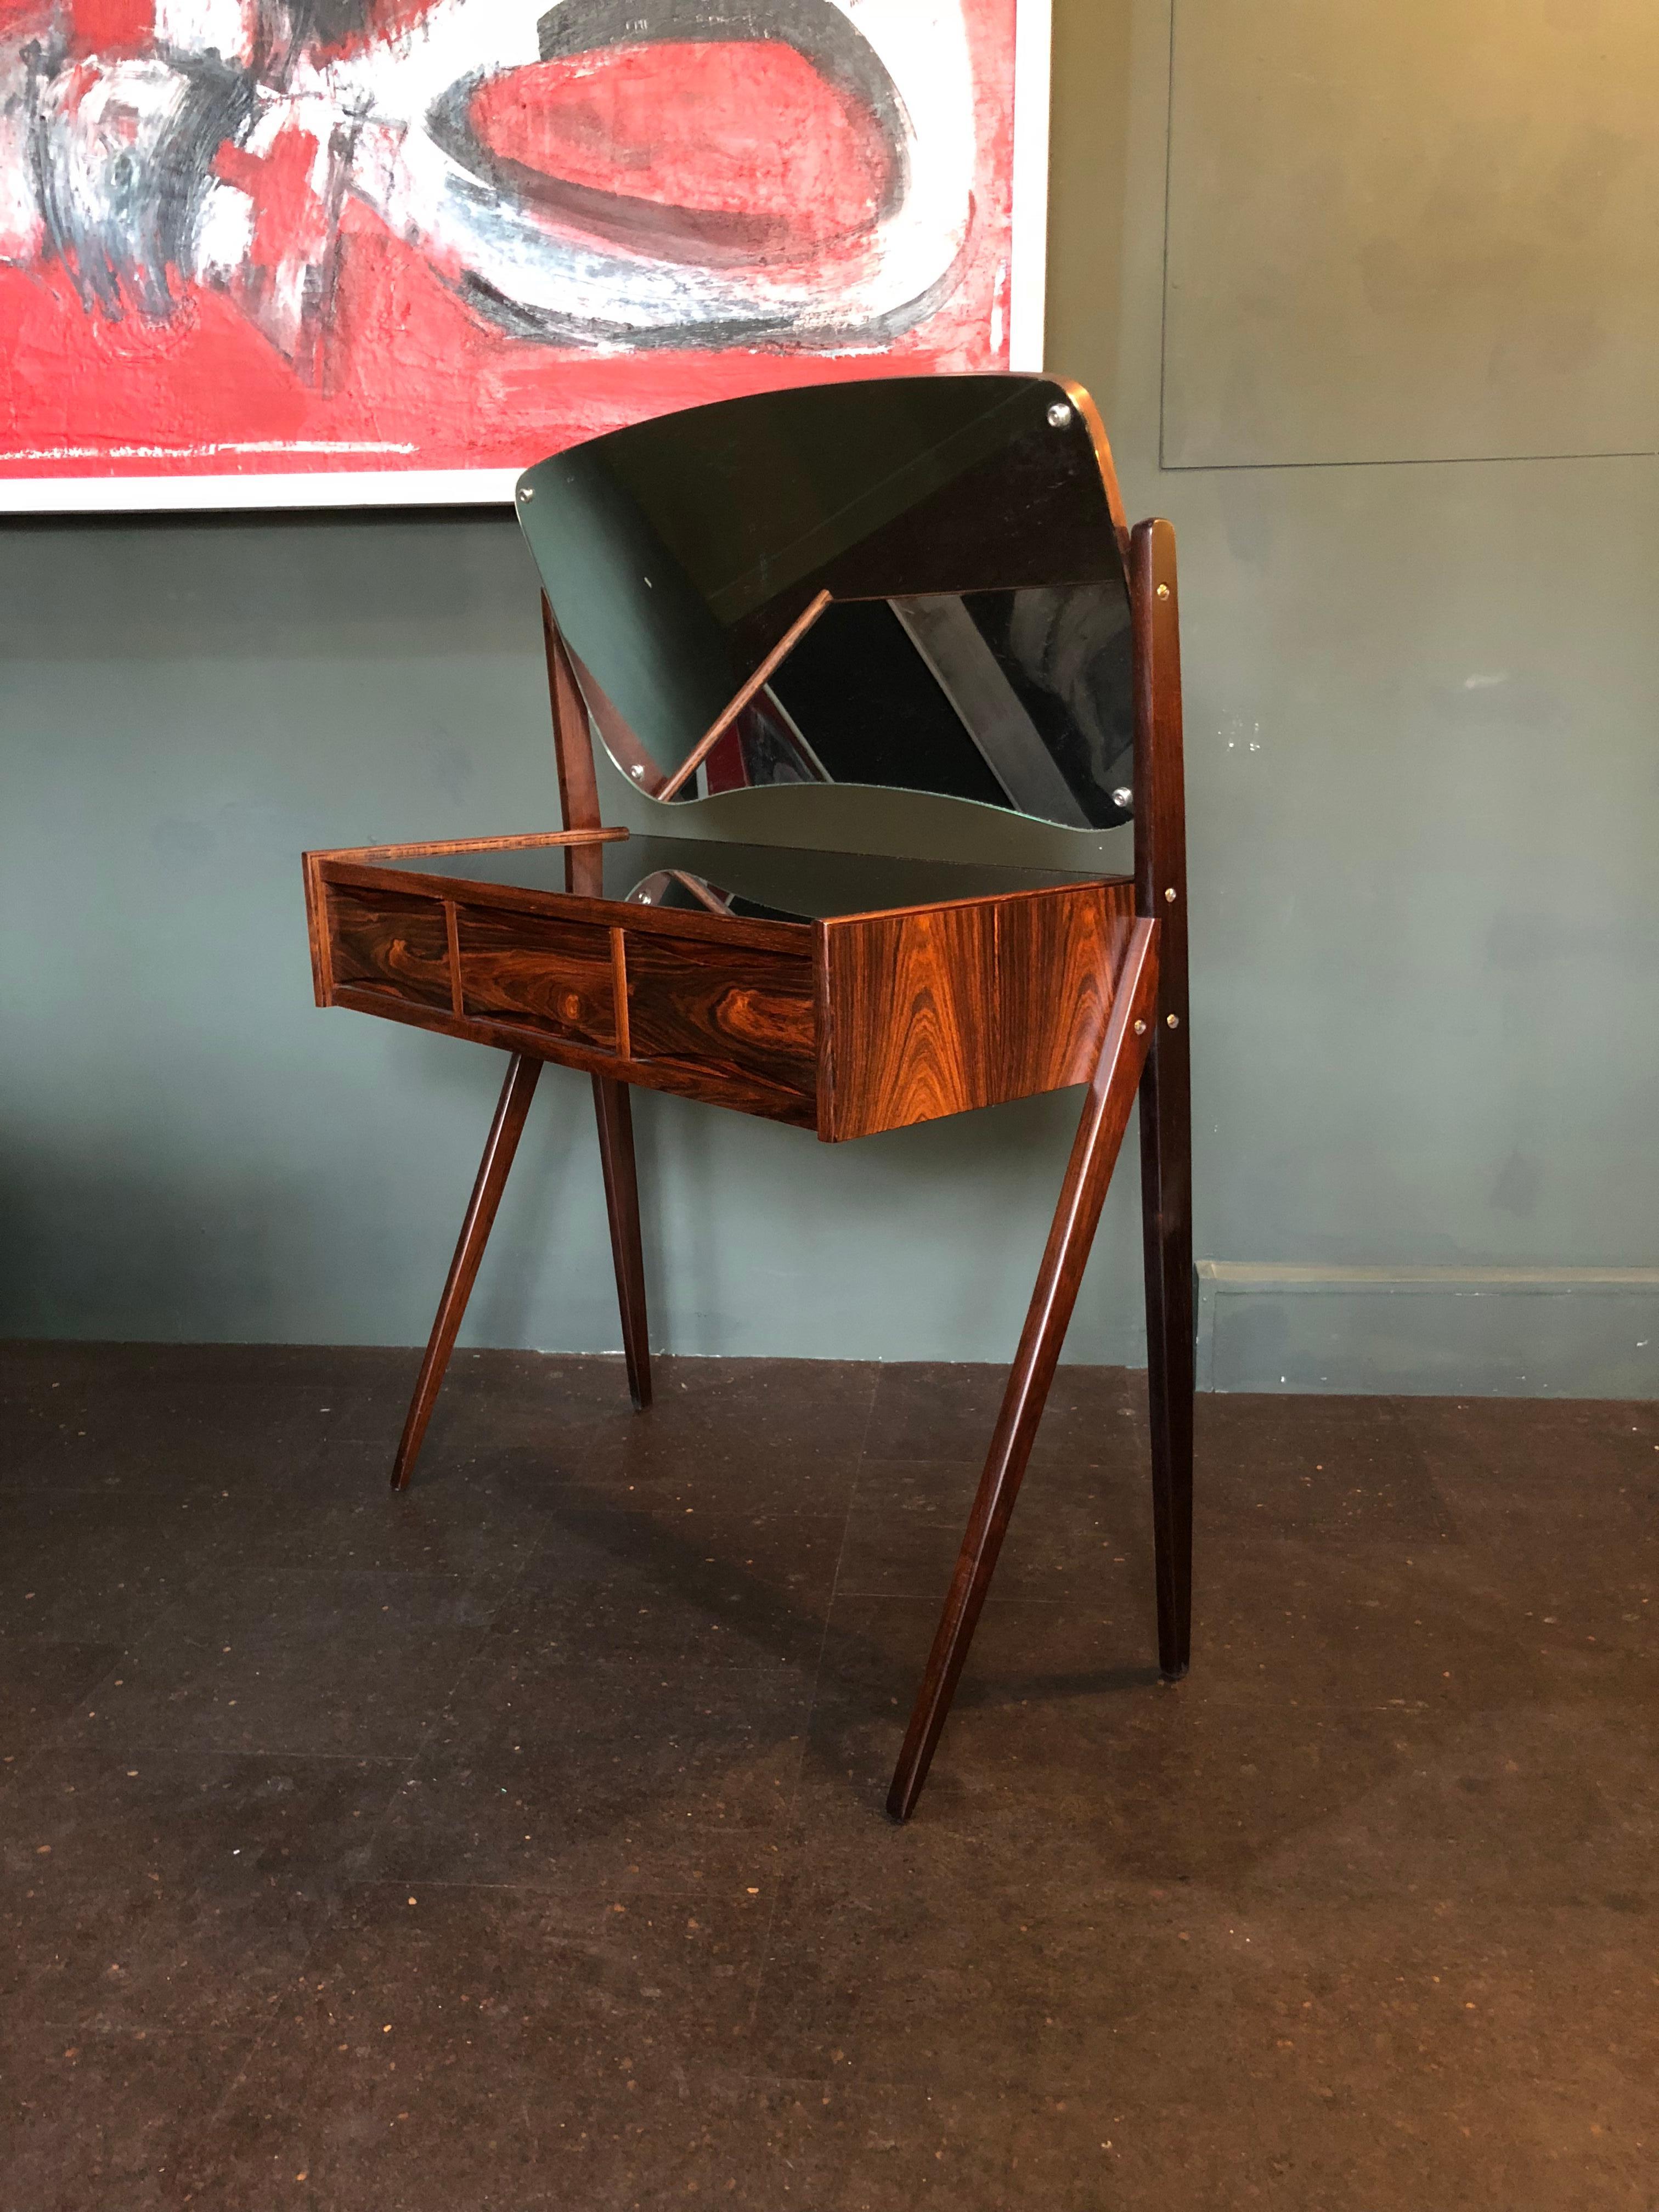 An Arne Vodder vanity unit. This is a superb piece of Scandinavian 20th century furniture with black glass surface and adjustable tilt mirror. Produced in Denmark, circa 1960. We have a well matched stool to go with this piece and it can be